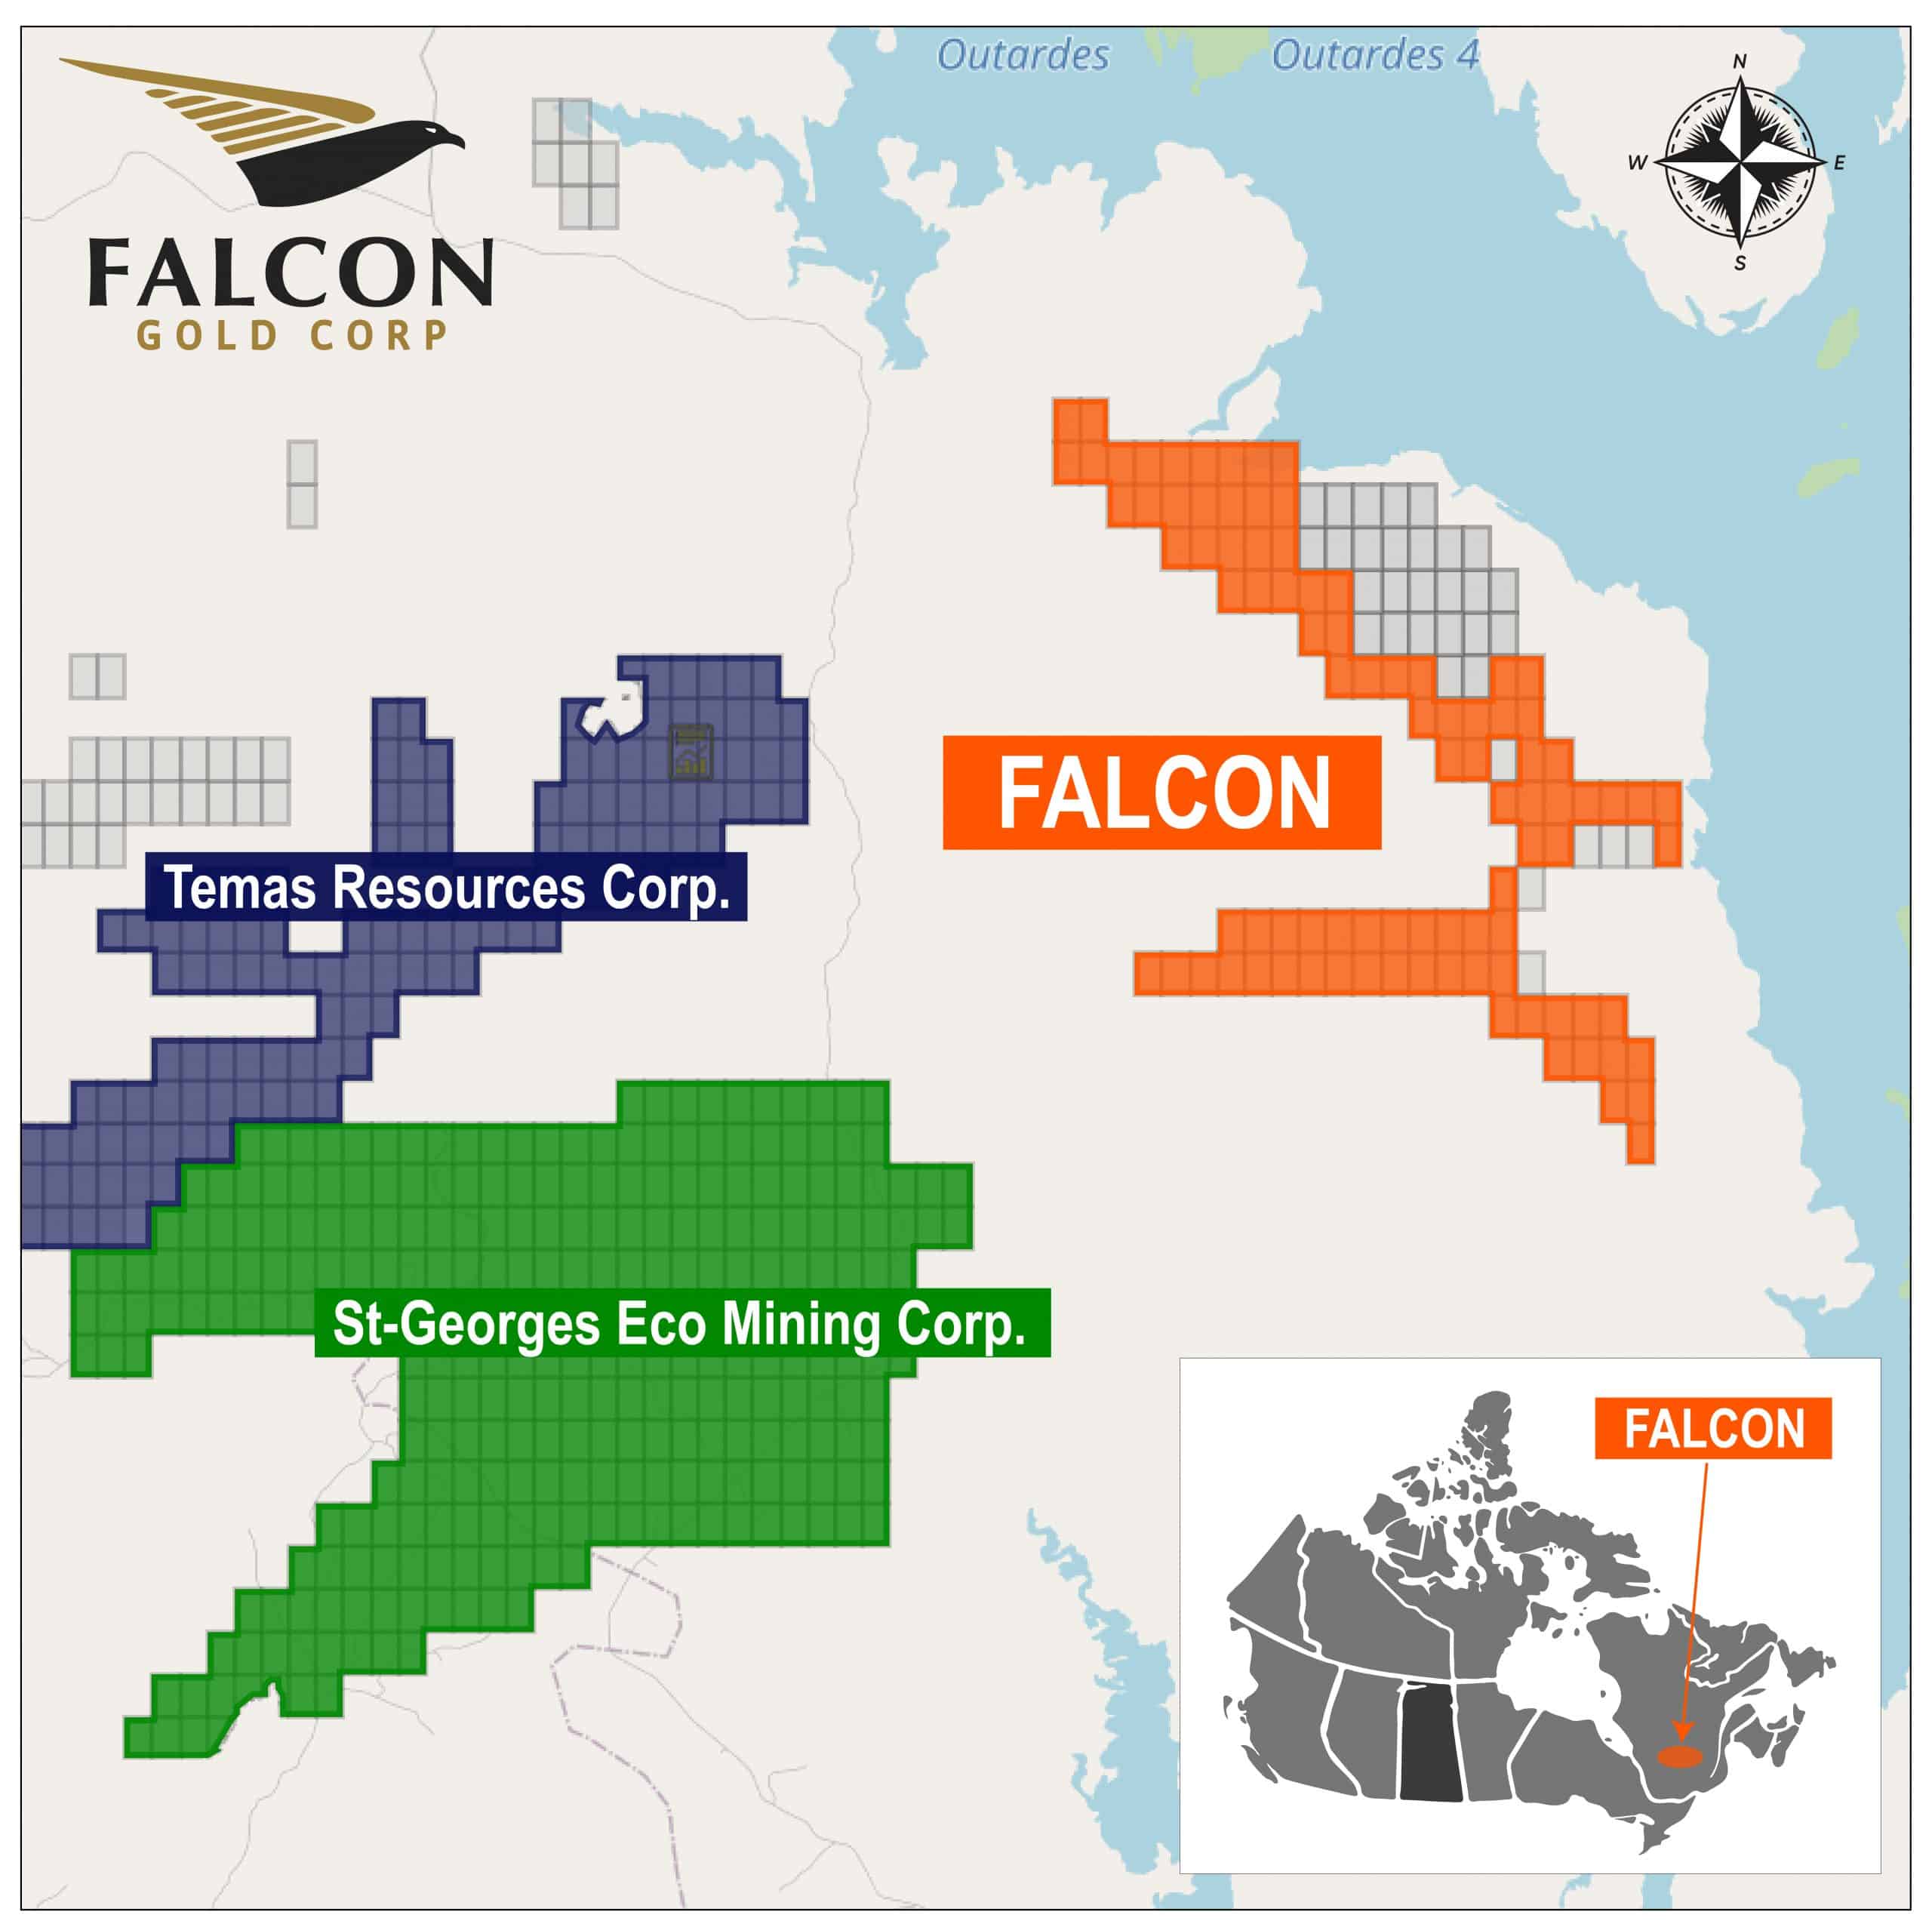 Outarde Property Falcon Gold Corp Outarde Property Web Designer